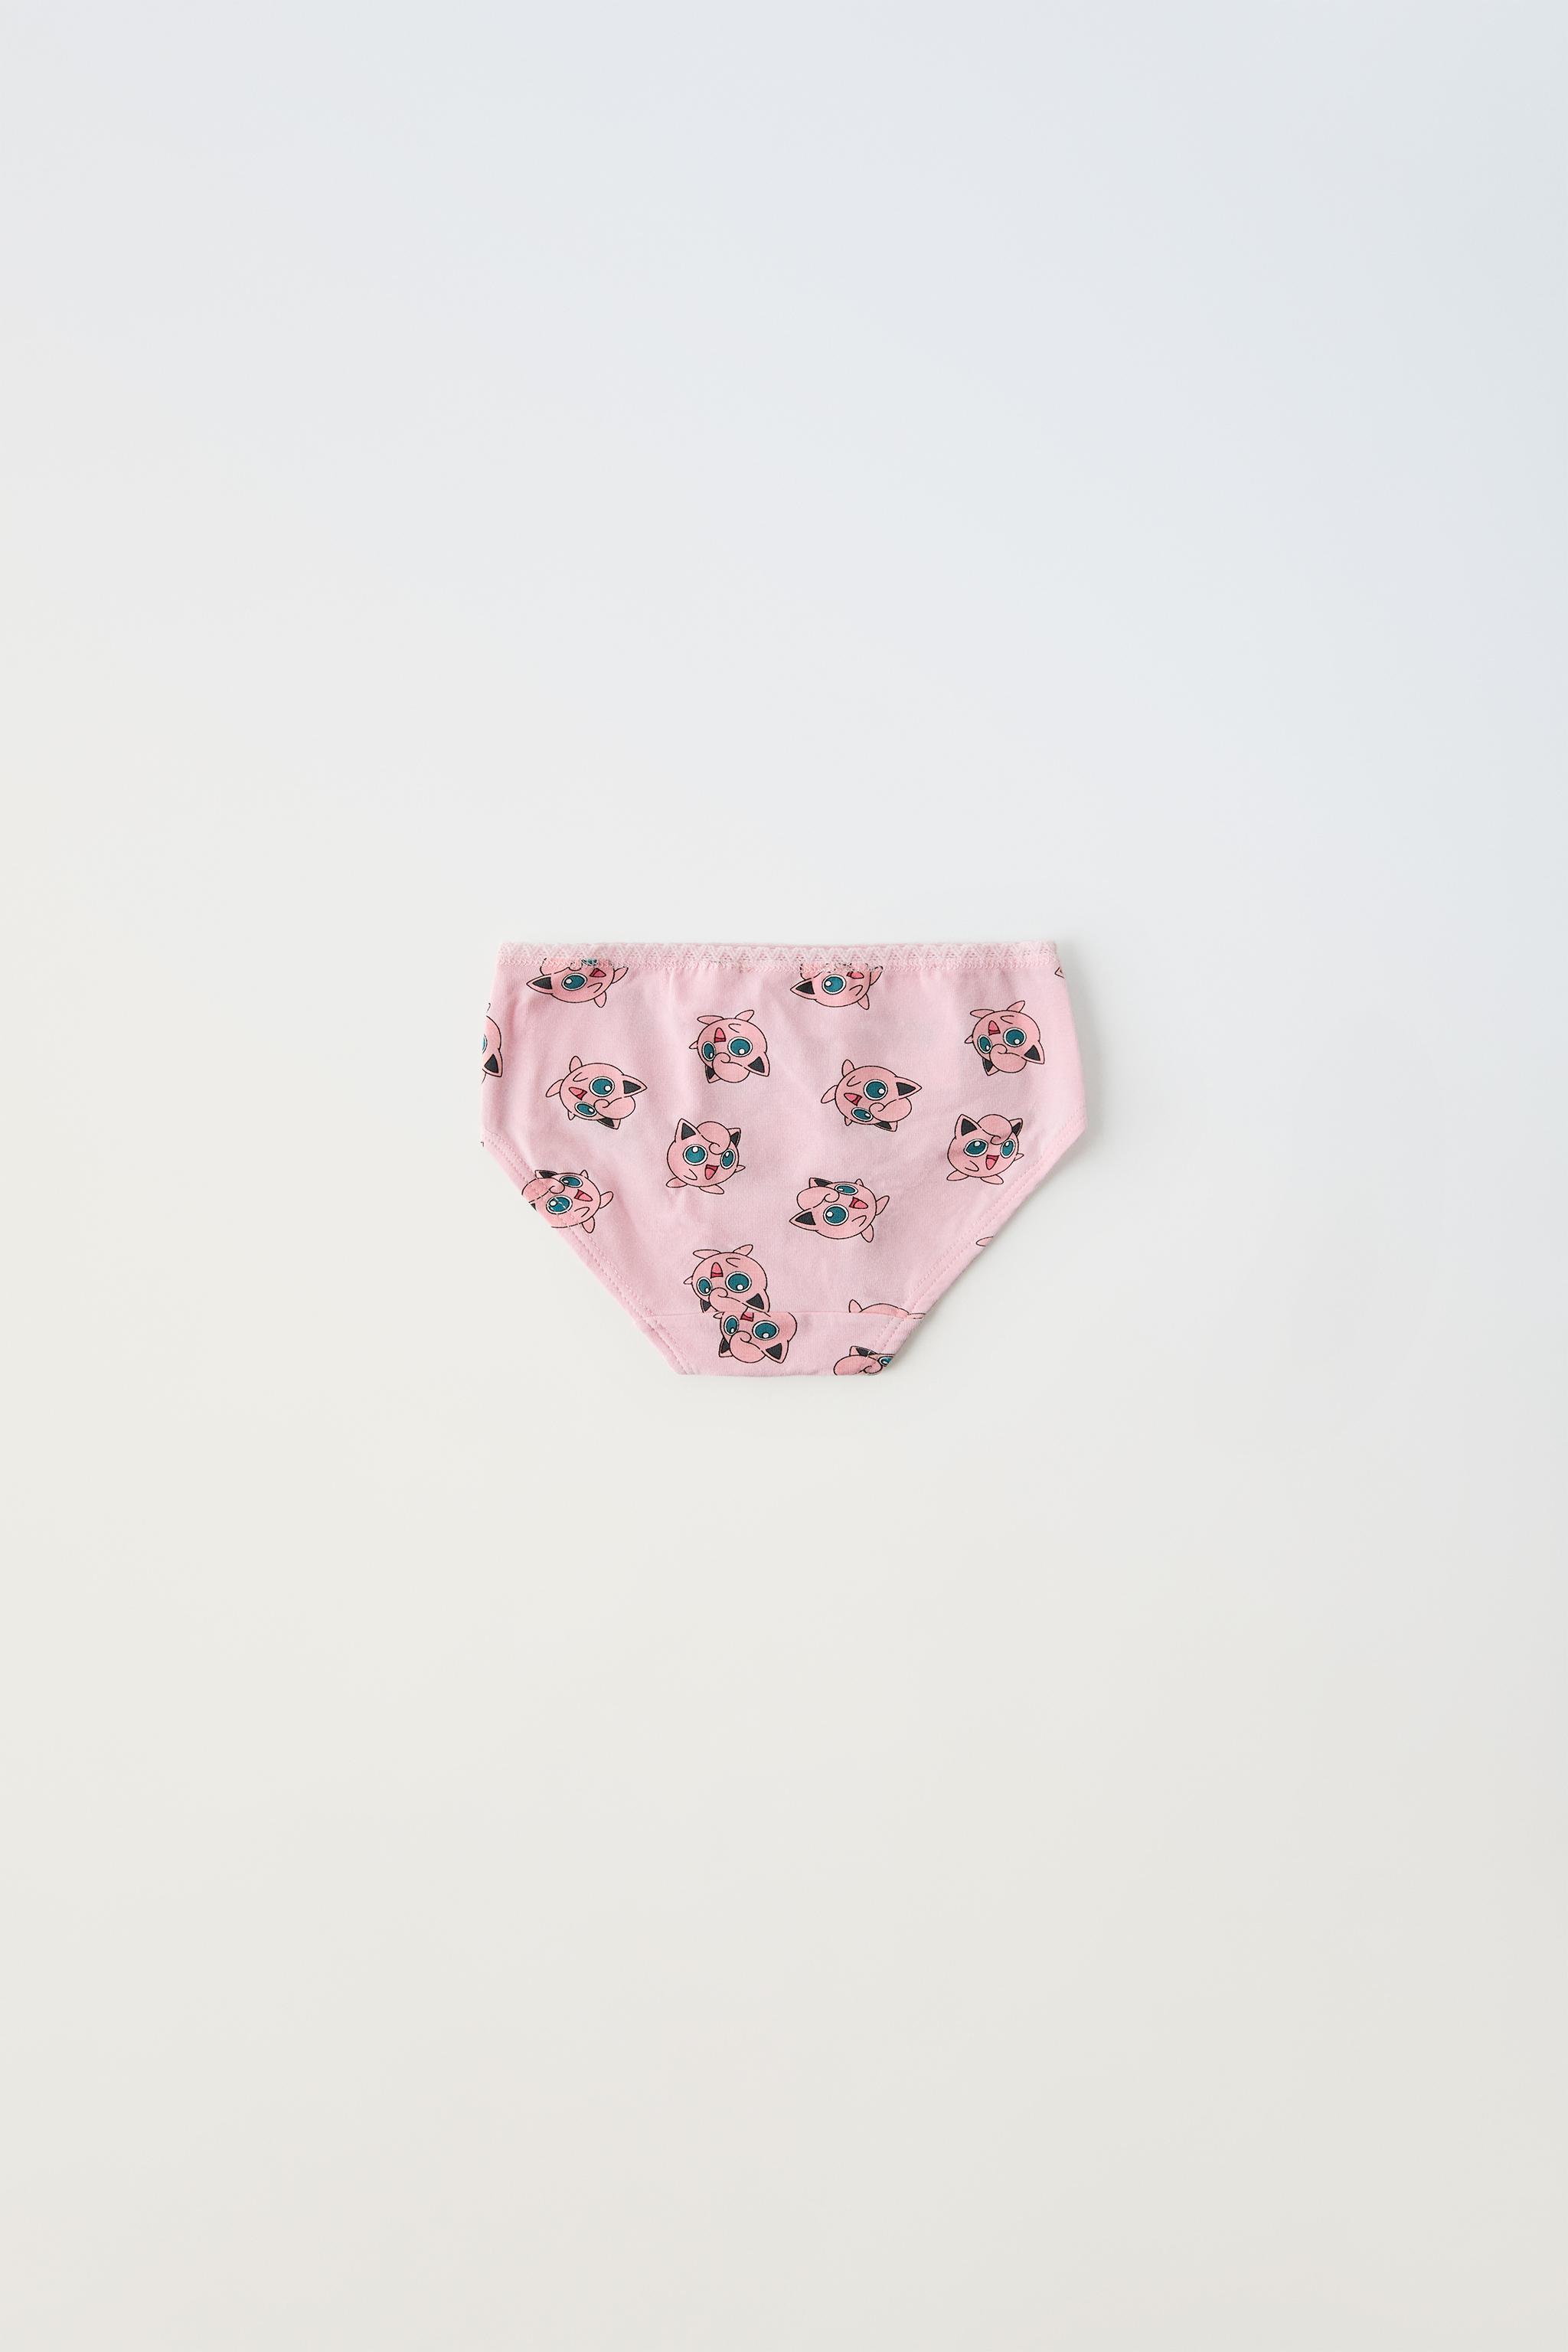 Zara Panties in Osu for sale ▷ Prices on